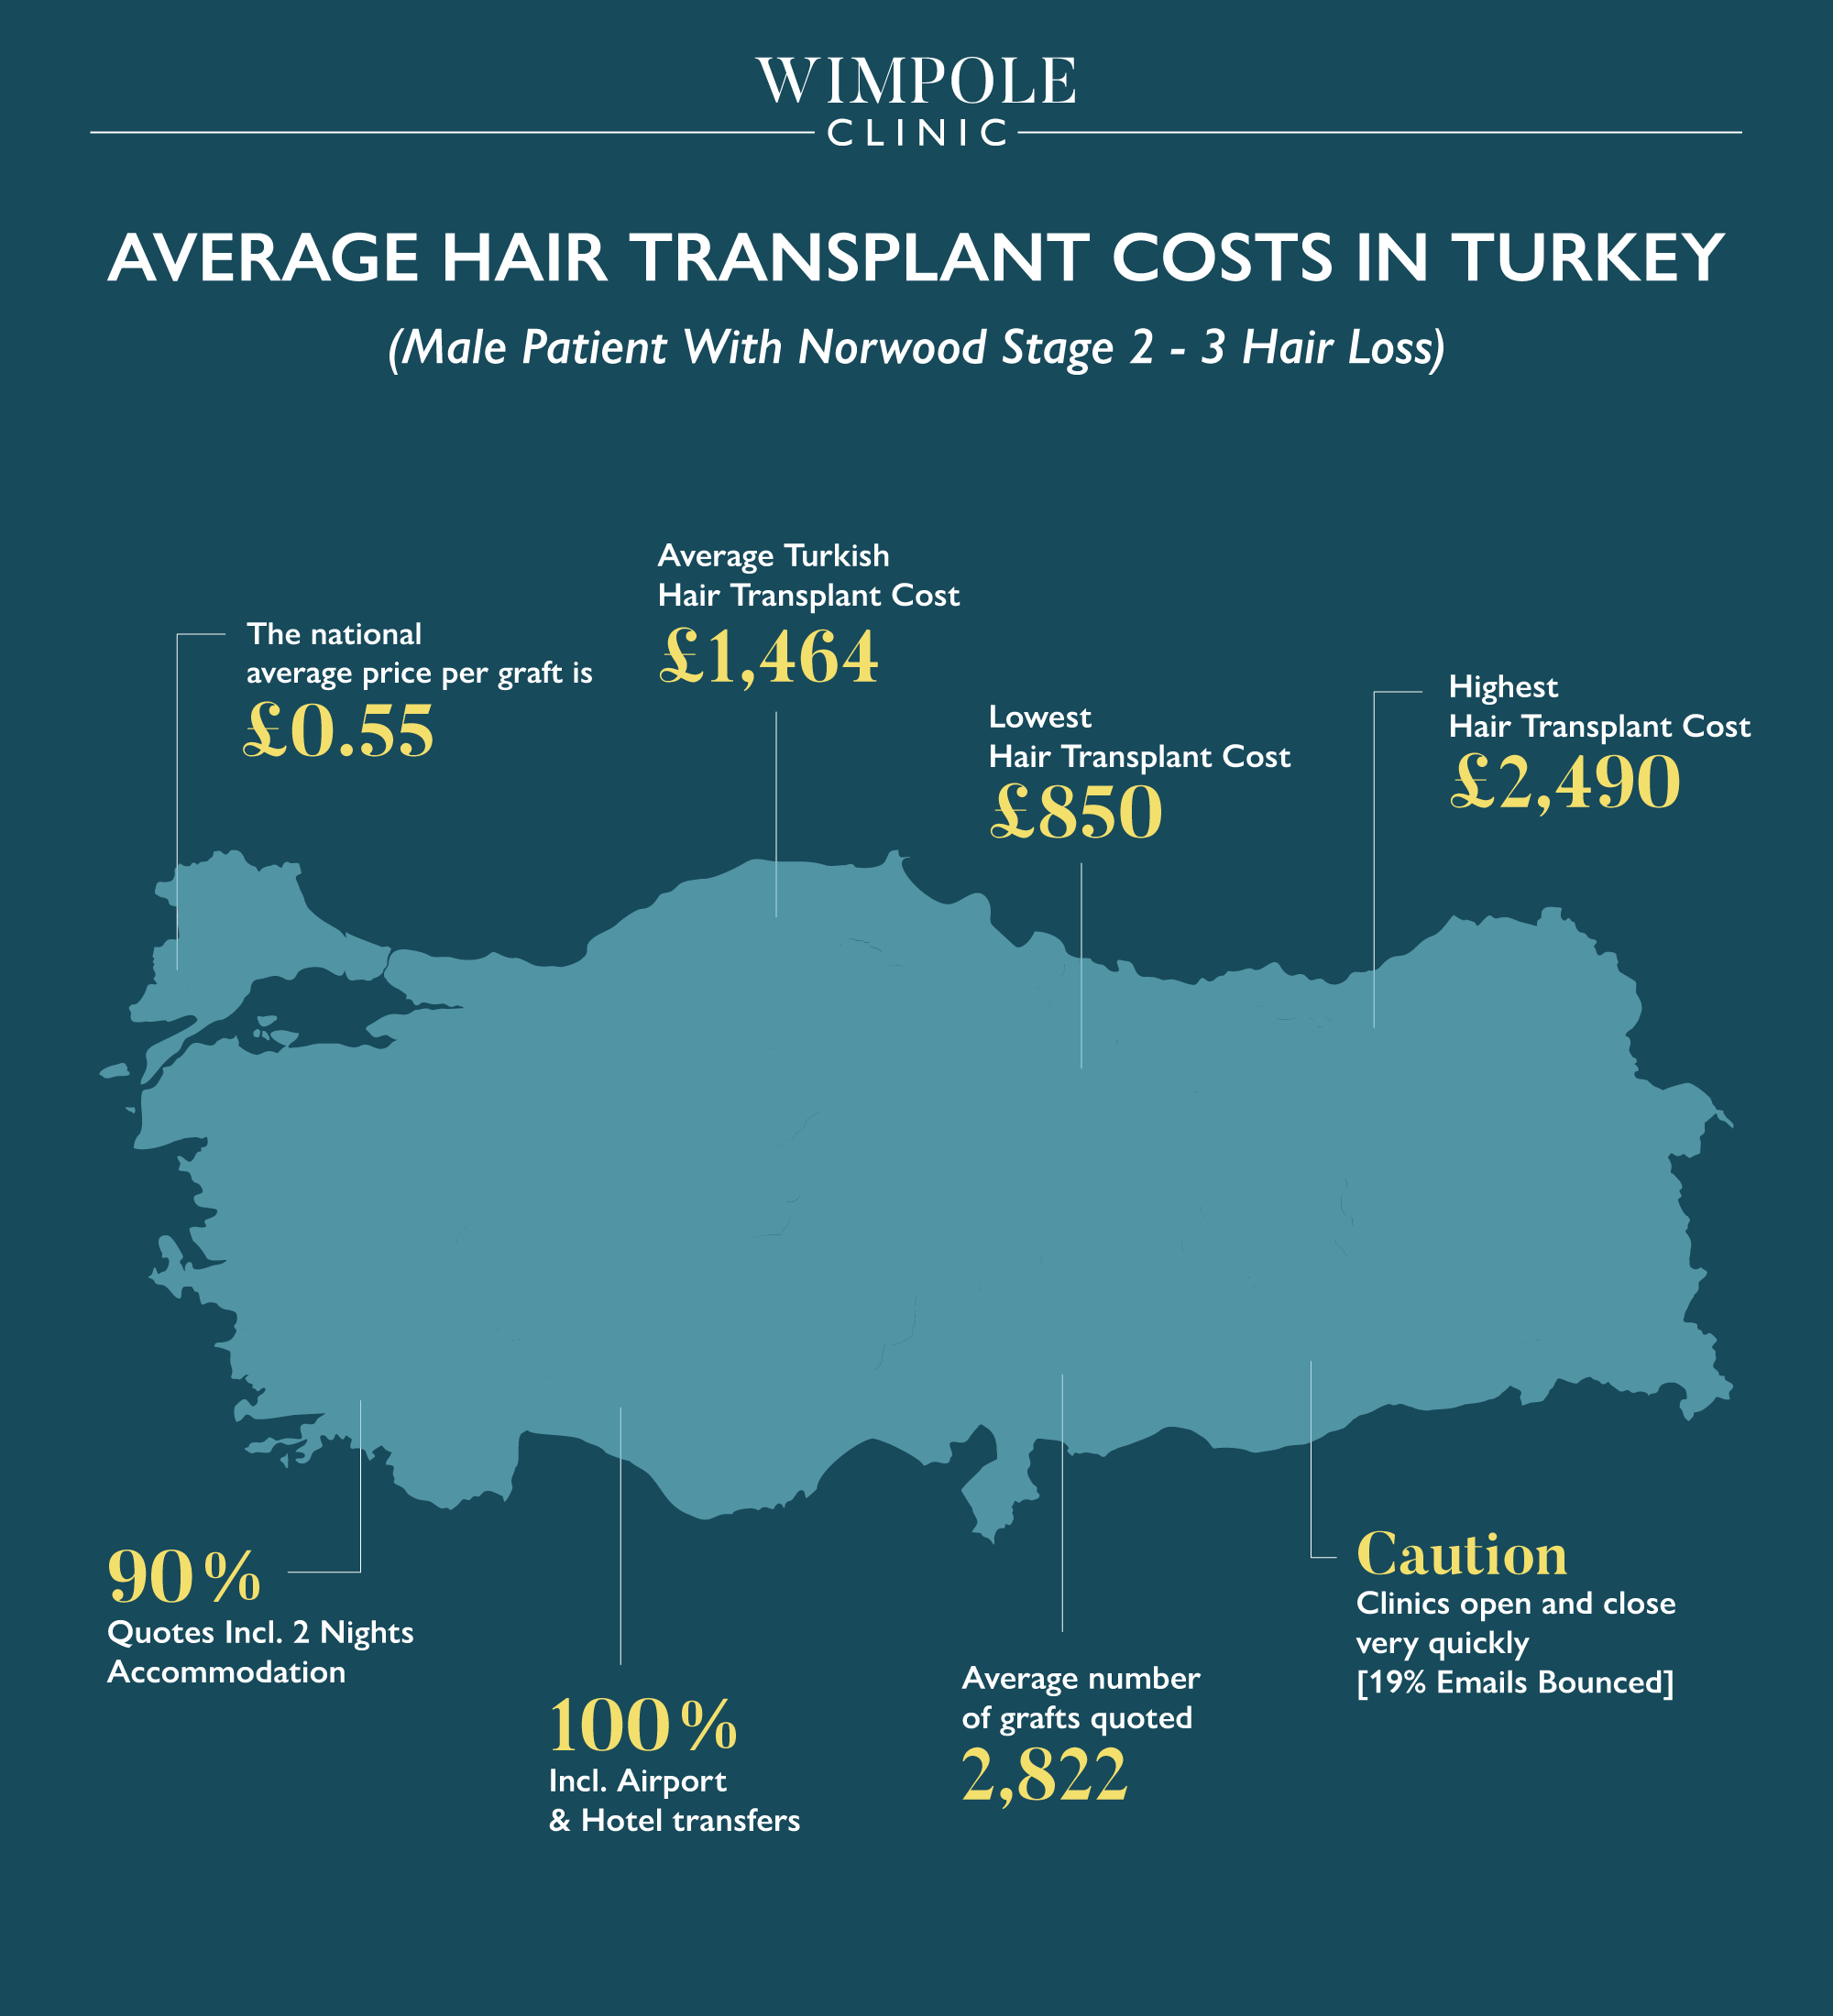 Wimpole Clinic graphic about the average hair transplant cost in Turkey